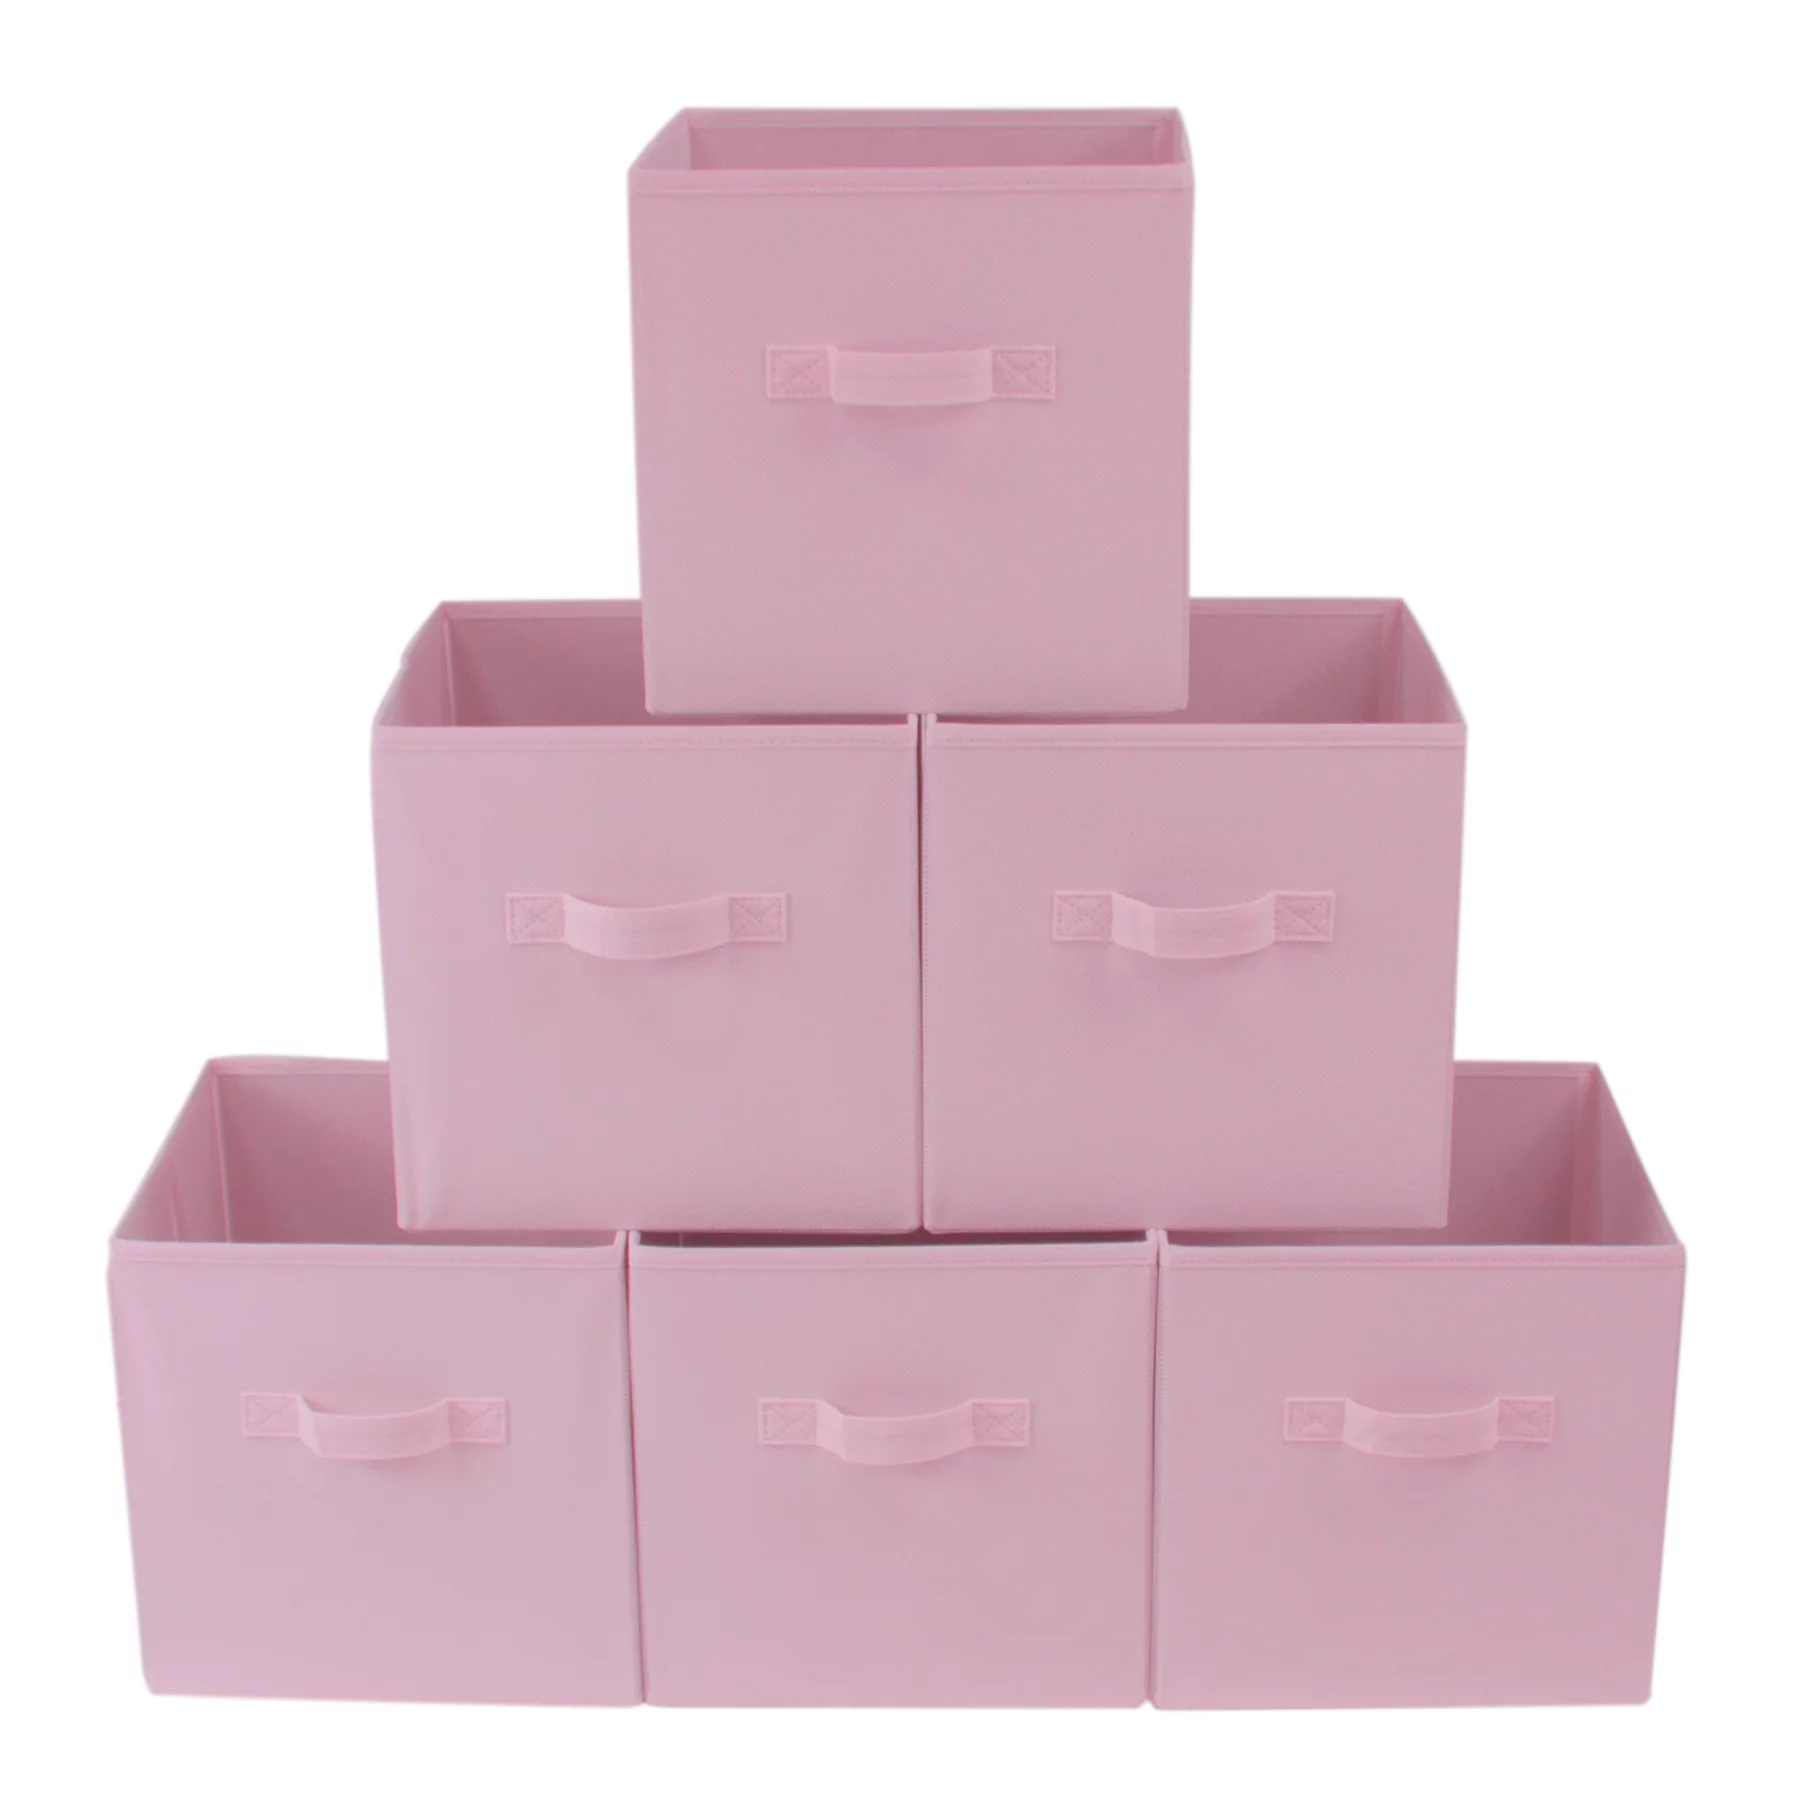 Mainstays Collapsible Cube Fabric Storage Bins (10.5" x 10.5"), Pink Puff, 6 Pack